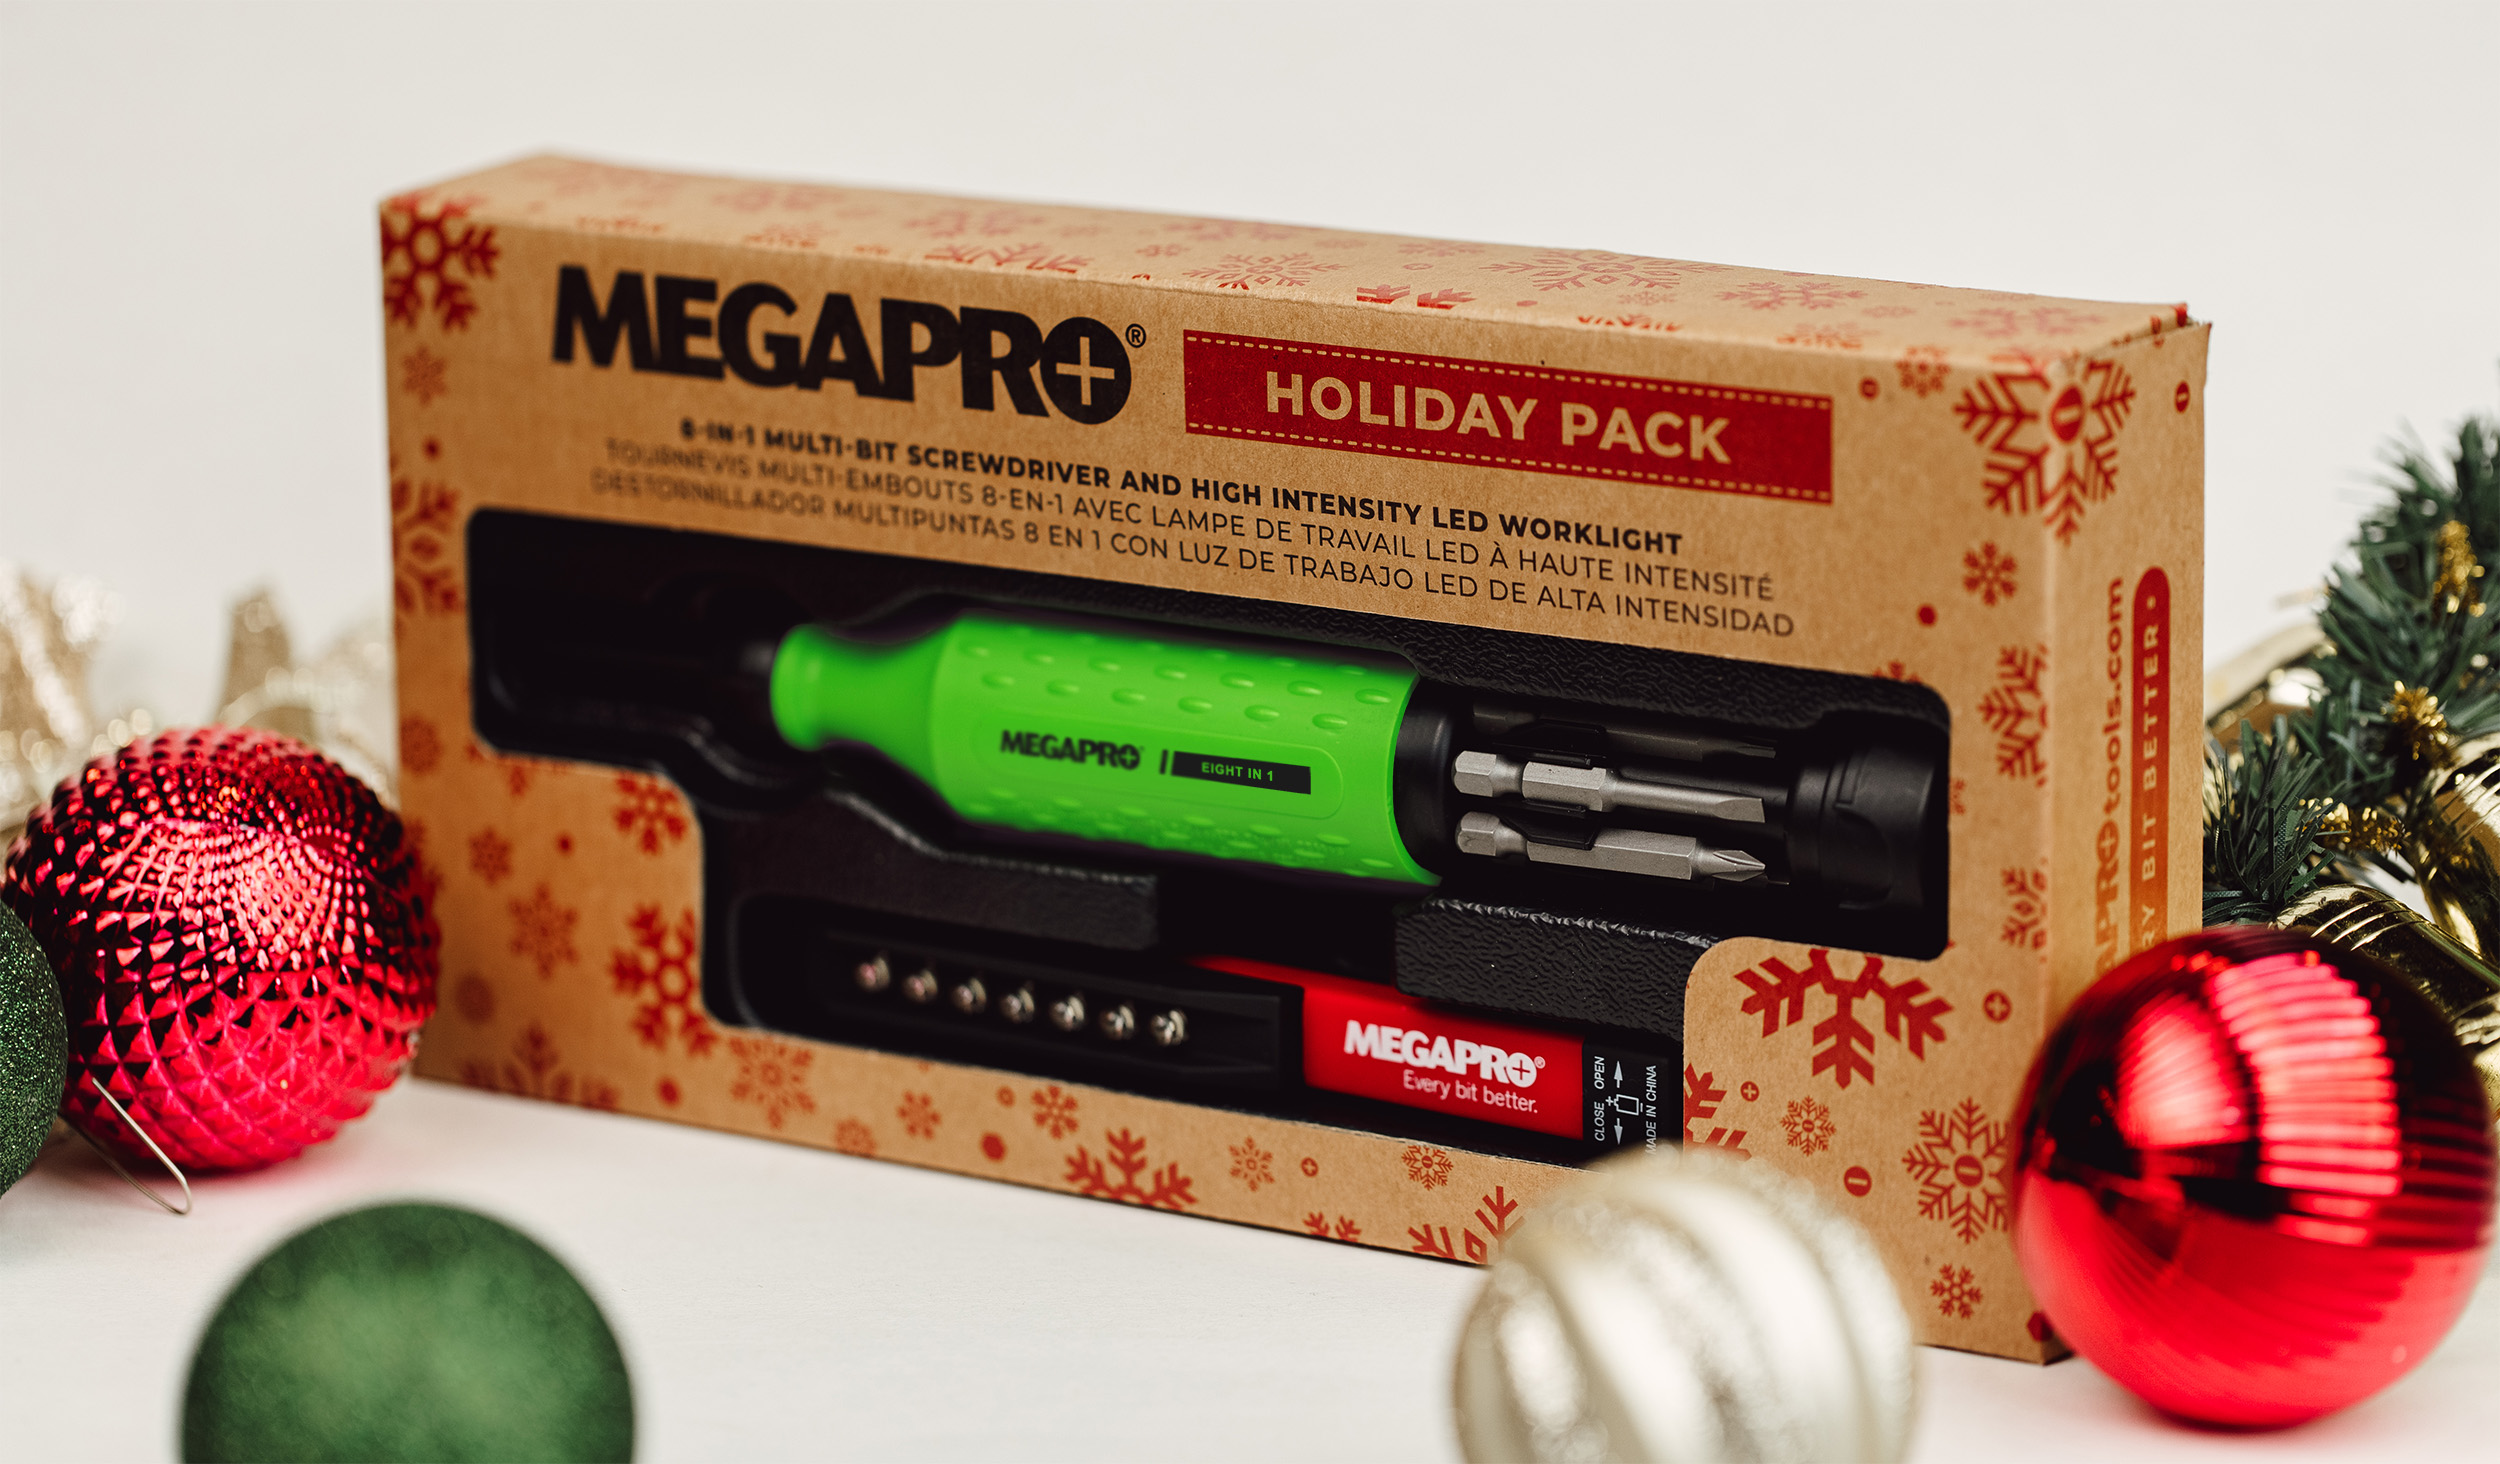 Megapro's top 5 holiday gift ideas